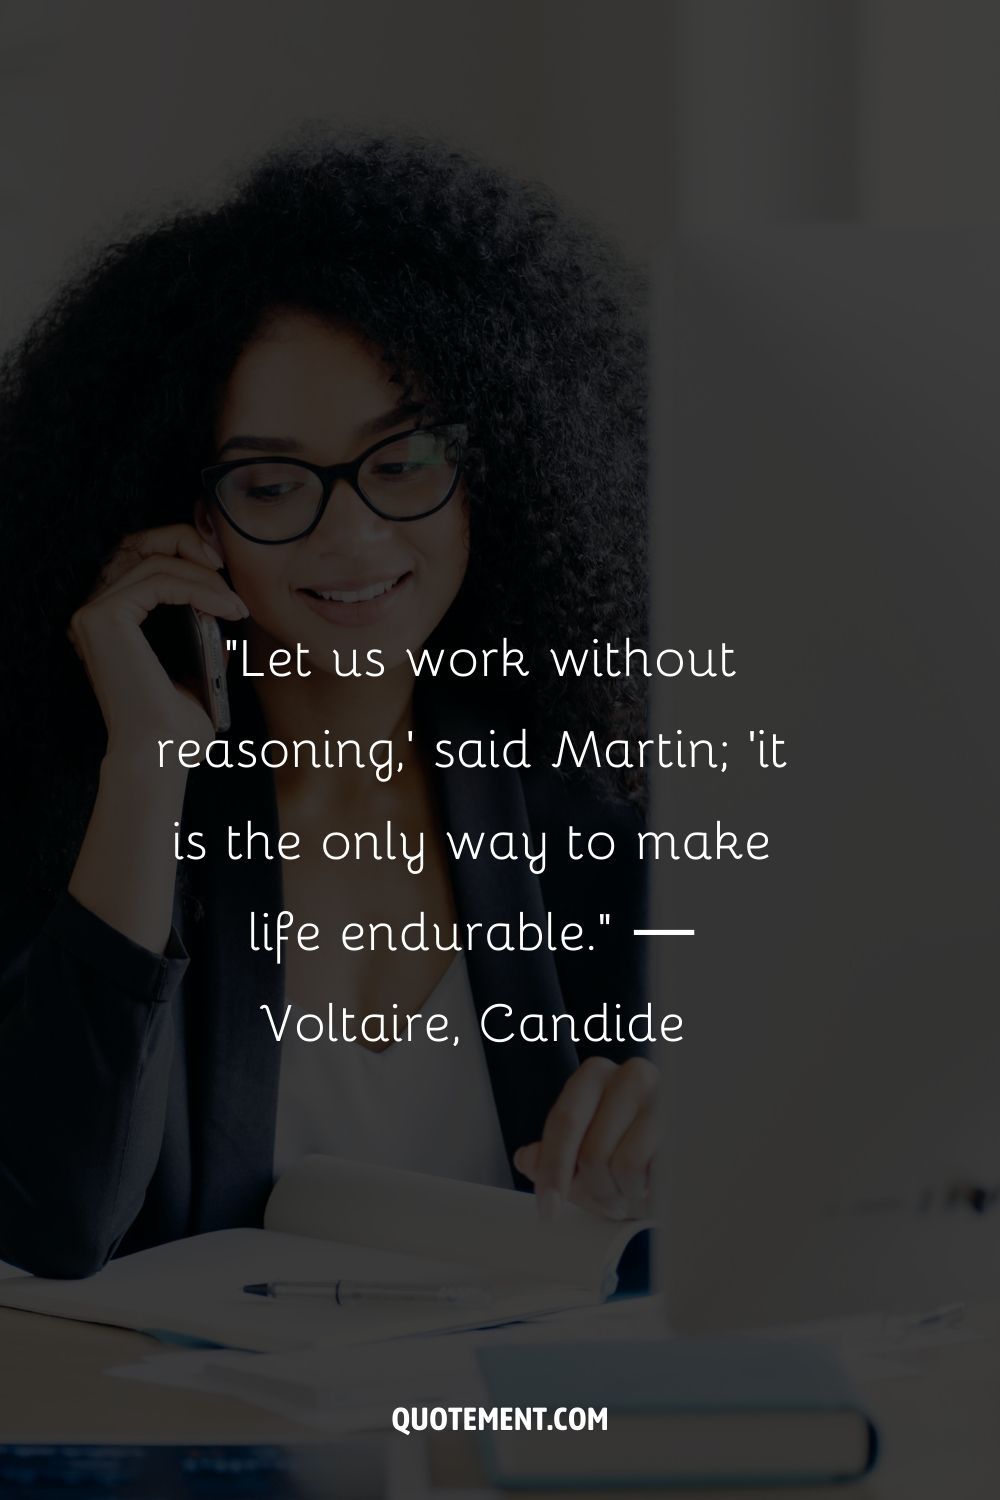 “Let us work without reasoning,' said Martin; 'it is the only way to make life endurable.” ― Voltaire, Candide